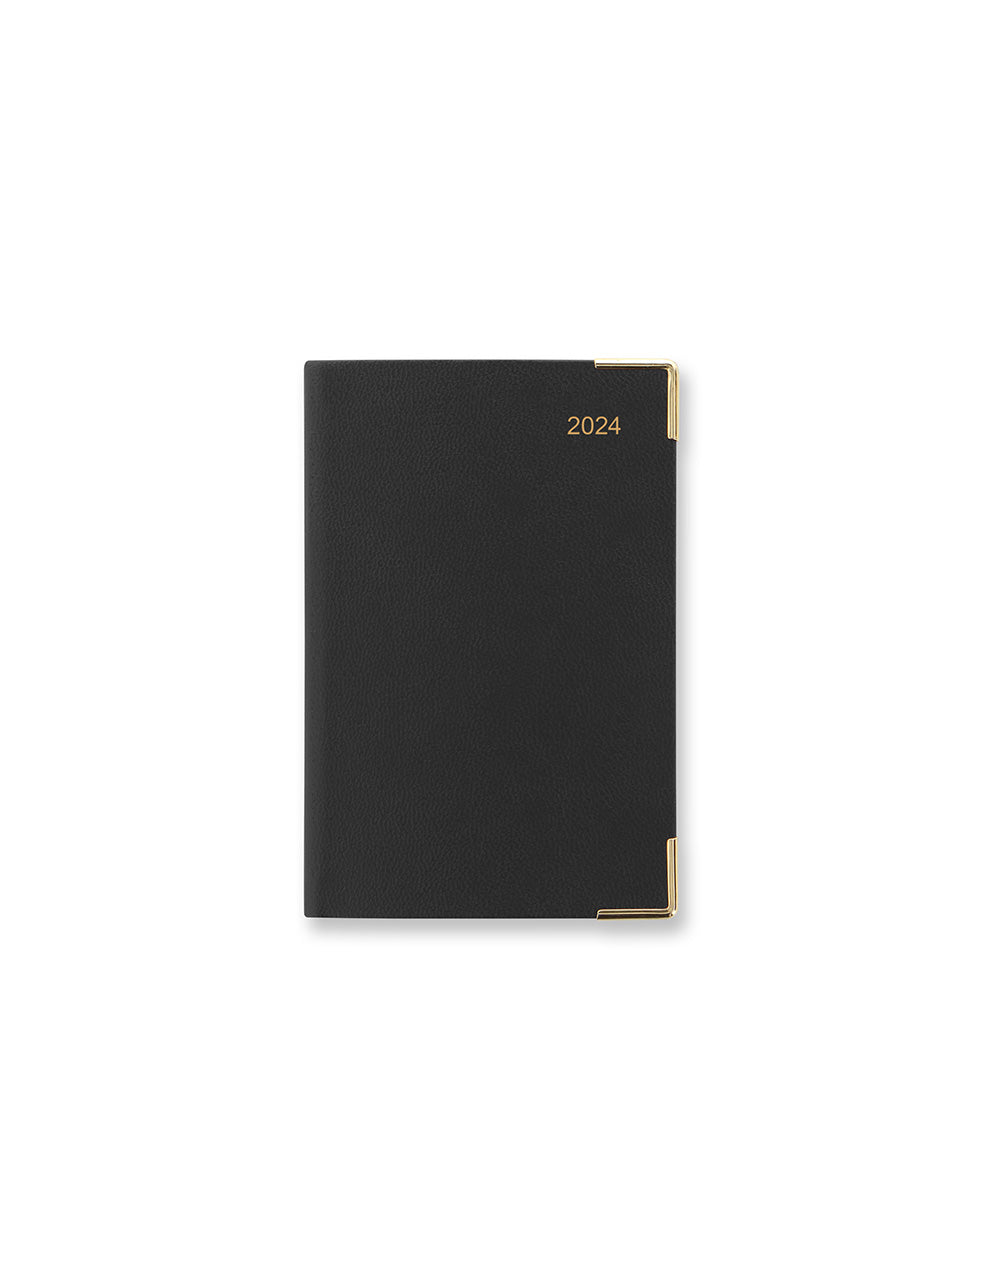 Letts of London 2024 Classic Mini Pocket Week to View Planner - Black